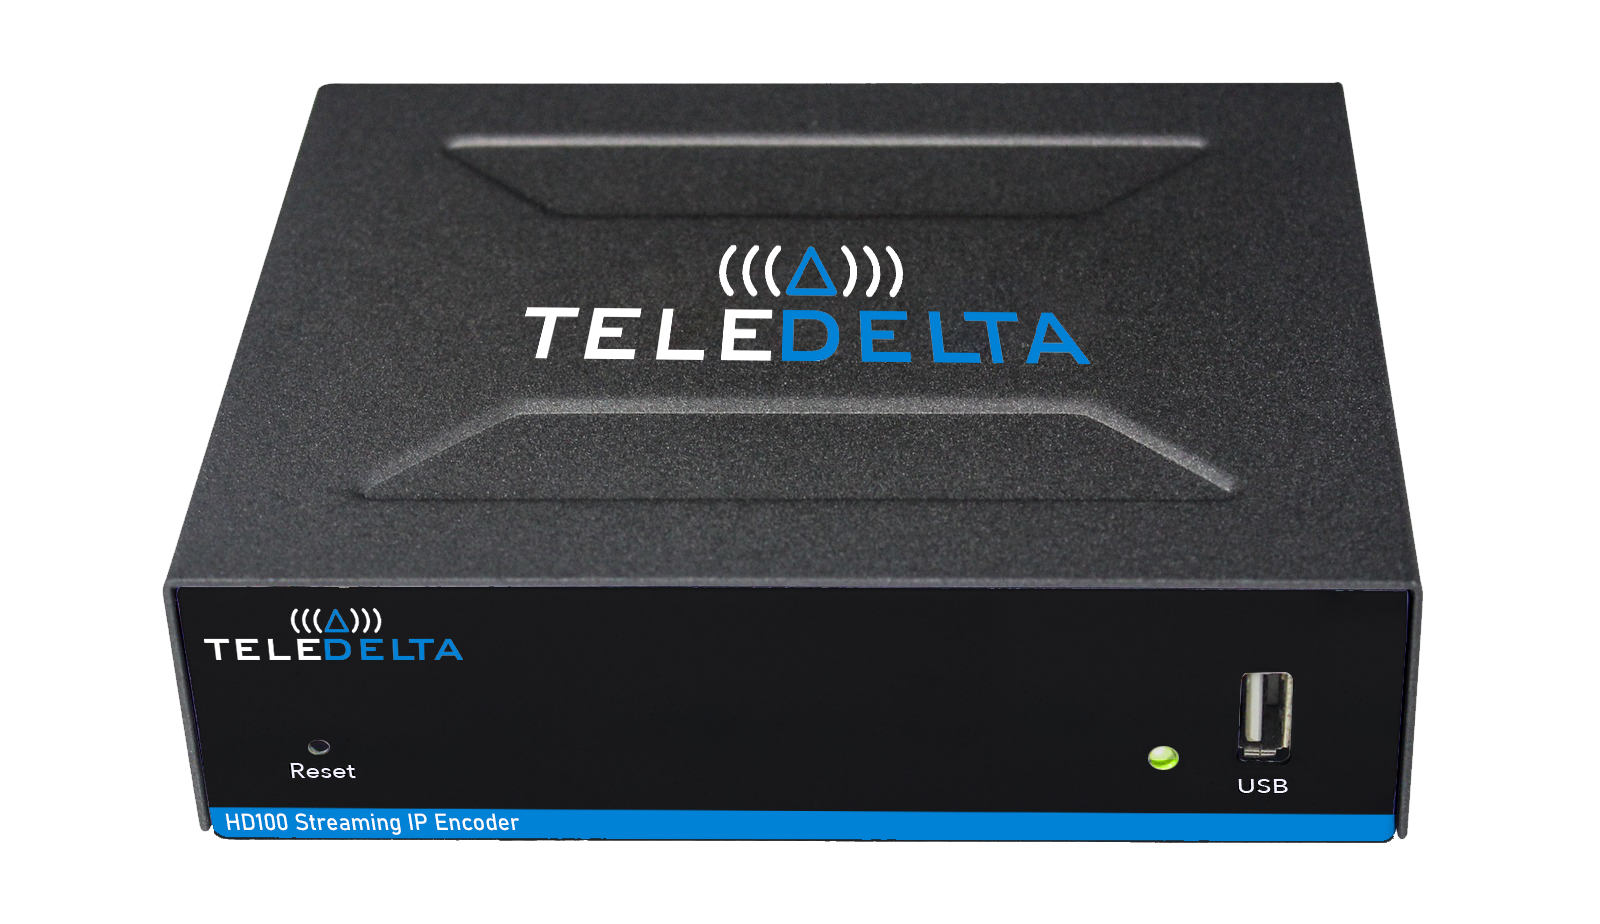 The TeleDelta HD1100 series are a single-channel HDMI or SDI encoder/streamer for live video and audio content distribution for private IPTV, Live Event, Webcasting and Internet Streaming Applications. The HD100 supports a wide range of industry standard streaming protocols including UDP, RTMP, RTMPS, RTSP and HLS for in-house IPTV and public streaming requirements. Controllable by a Web-GUI interface the HD1100 Series provides operators the ability to stream and record, saving content to a USB drive or portable hard-drive (Optional feature)